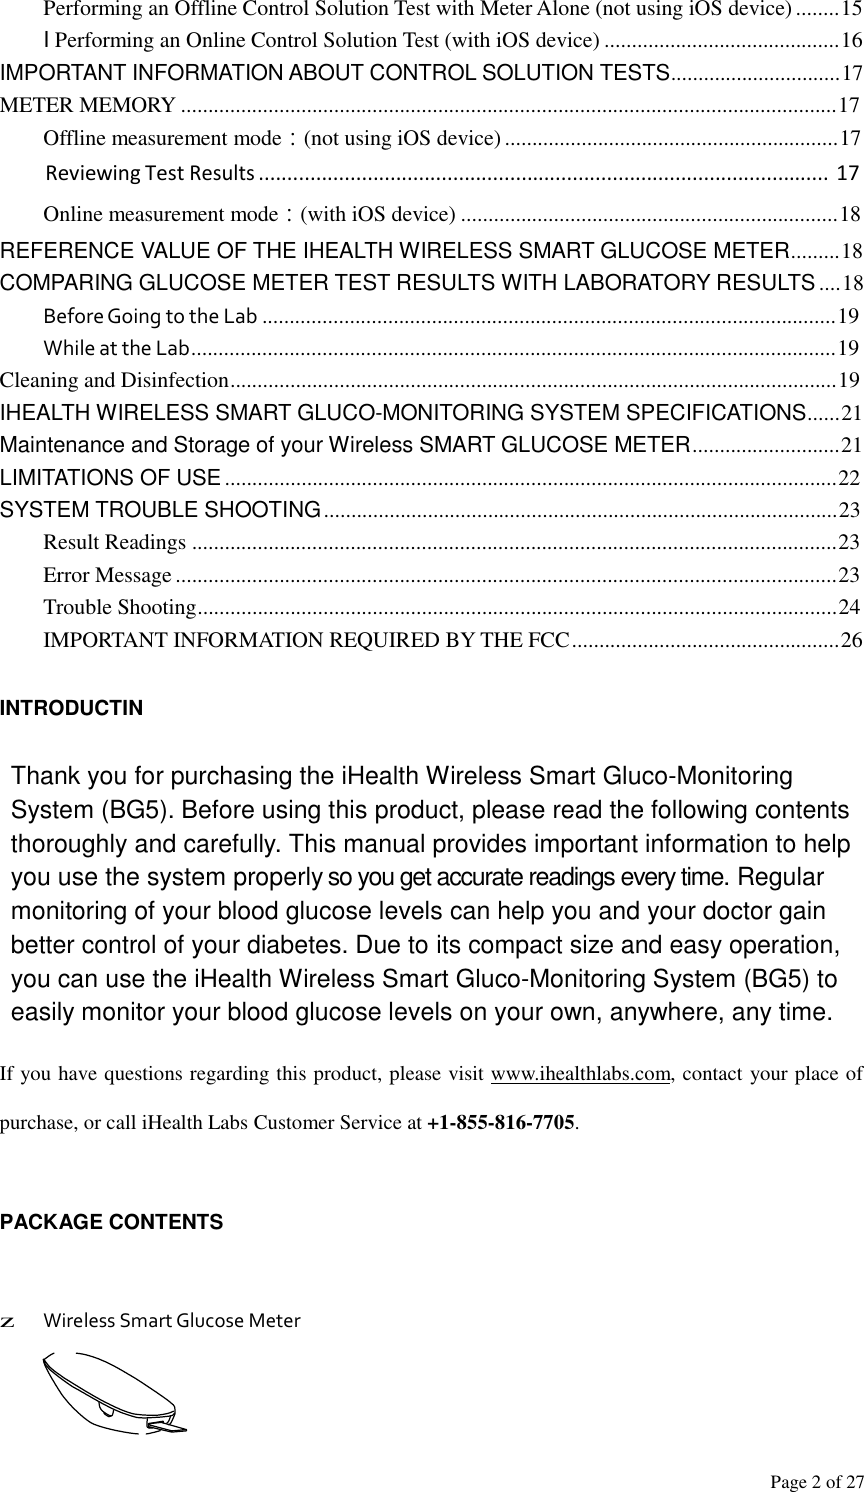 Page 2 of 27  Performing an Offline Control Solution Test with Meter Alone (not using iOS device) ........15 I Performing an Online Control Solution Test (with iOS device) ...........................................16 IMPORTANT INFORMATION ABOUT CONTROL SOLUTION TESTS...............................17 METER MEMORY ........................................................................................................................17 Offline measurement mode：(not using iOS device) .............................................................17 Reviewing Test Results ....................................................................................................  17 Online measurement mode：(with iOS device) .....................................................................18 REFERENCE VALUE OF THE IHEALTH WIRELESS SMART GLUCOSE METER.........18 COMPARING GLUCOSE METER TEST RESULTS WITH LABORATORY RESULTS ....18 Before Going to the Lab .........................................................................................................19 While at the Lab......................................................................................................................19 Cleaning and Disinfection...............................................................................................................19 IHEALTH WIRELESS SMART GLUCO-MONITORING SYSTEM SPECIFICATIONS......21 Maintenance and Storage of your Wireless SMART GLUCOSE METER...........................21 LIMITATIONS OF USE ................................................................................................................22 SYSTEM TROUBLE SHOOTING ..............................................................................................23 Result Readings ......................................................................................................................23 Error Message .........................................................................................................................23 Trouble Shooting.....................................................................................................................24 IMPORTANT INFORMATION REQUIRED BY THE FCC .................................................26   INTRODUCTIN   Thank you for purchasing the iHealth Wireless Smart Gluco-Monitoring System (BG5). Before using this product, please read the following contents thoroughly and carefully. This manual provides important information to help you use the system properly so you get accurate readings every time. Regular monitoring of your blood glucose levels can help you and your doctor gain better control of your diabetes. Due to its compact size and easy operation, you can use the iHealth Wireless Smart Gluco-Monitoring System (BG5) to easily monitor your blood glucose levels on your own, anywhere, any time.  If you have questions regarding this product, please visit www.ihealthlabs.com, contact your place of purchase, or call iHealth Labs Customer Service at +1-855-816-7705.   PACKAGE CONTENTS     z Wireless Smart Glucose Meter 